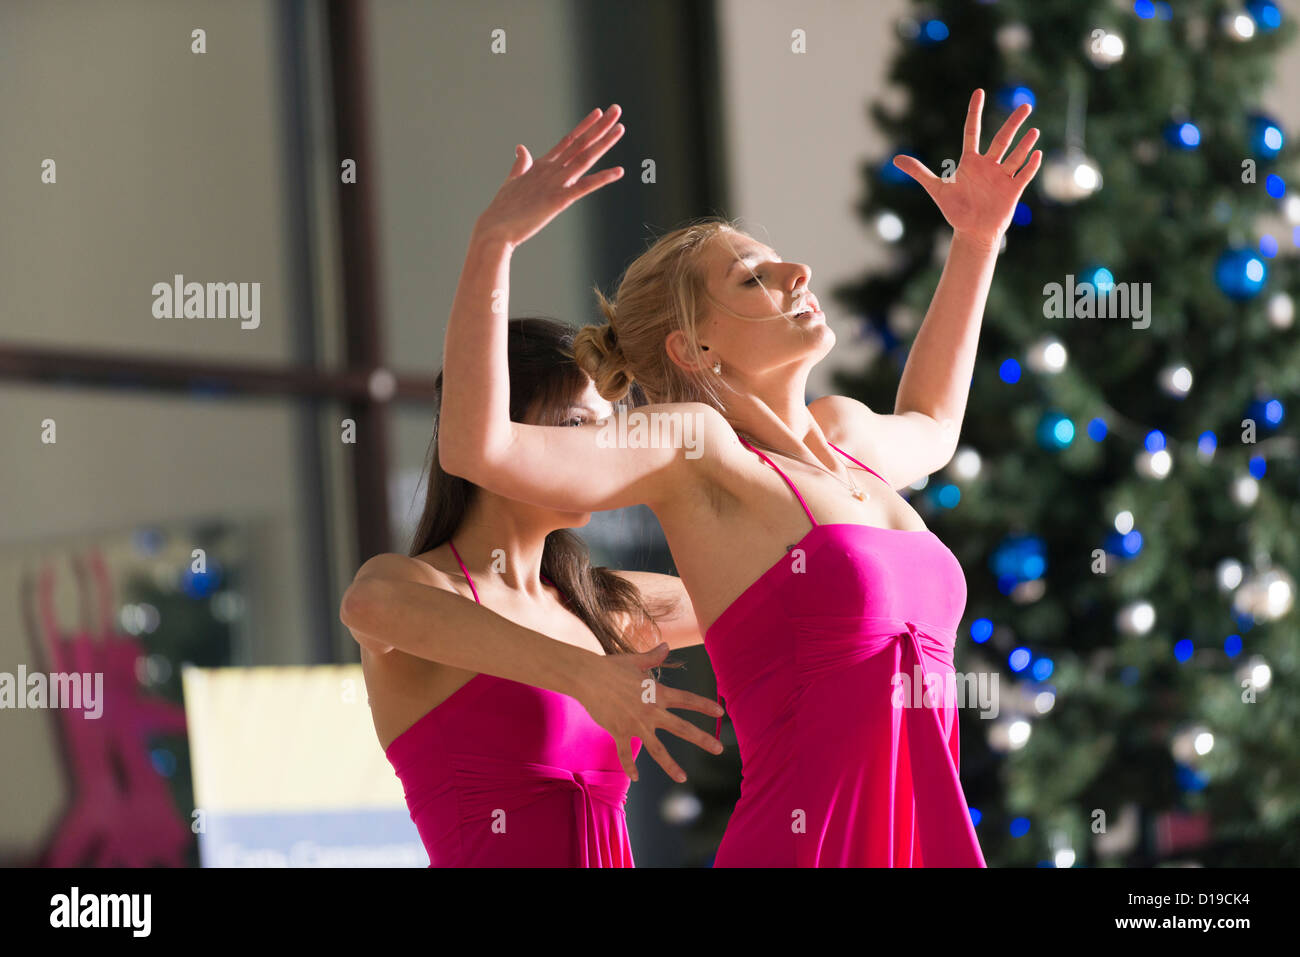 dance dancer dancing competition local club health wellness fitness gym studio duo Stock Photo